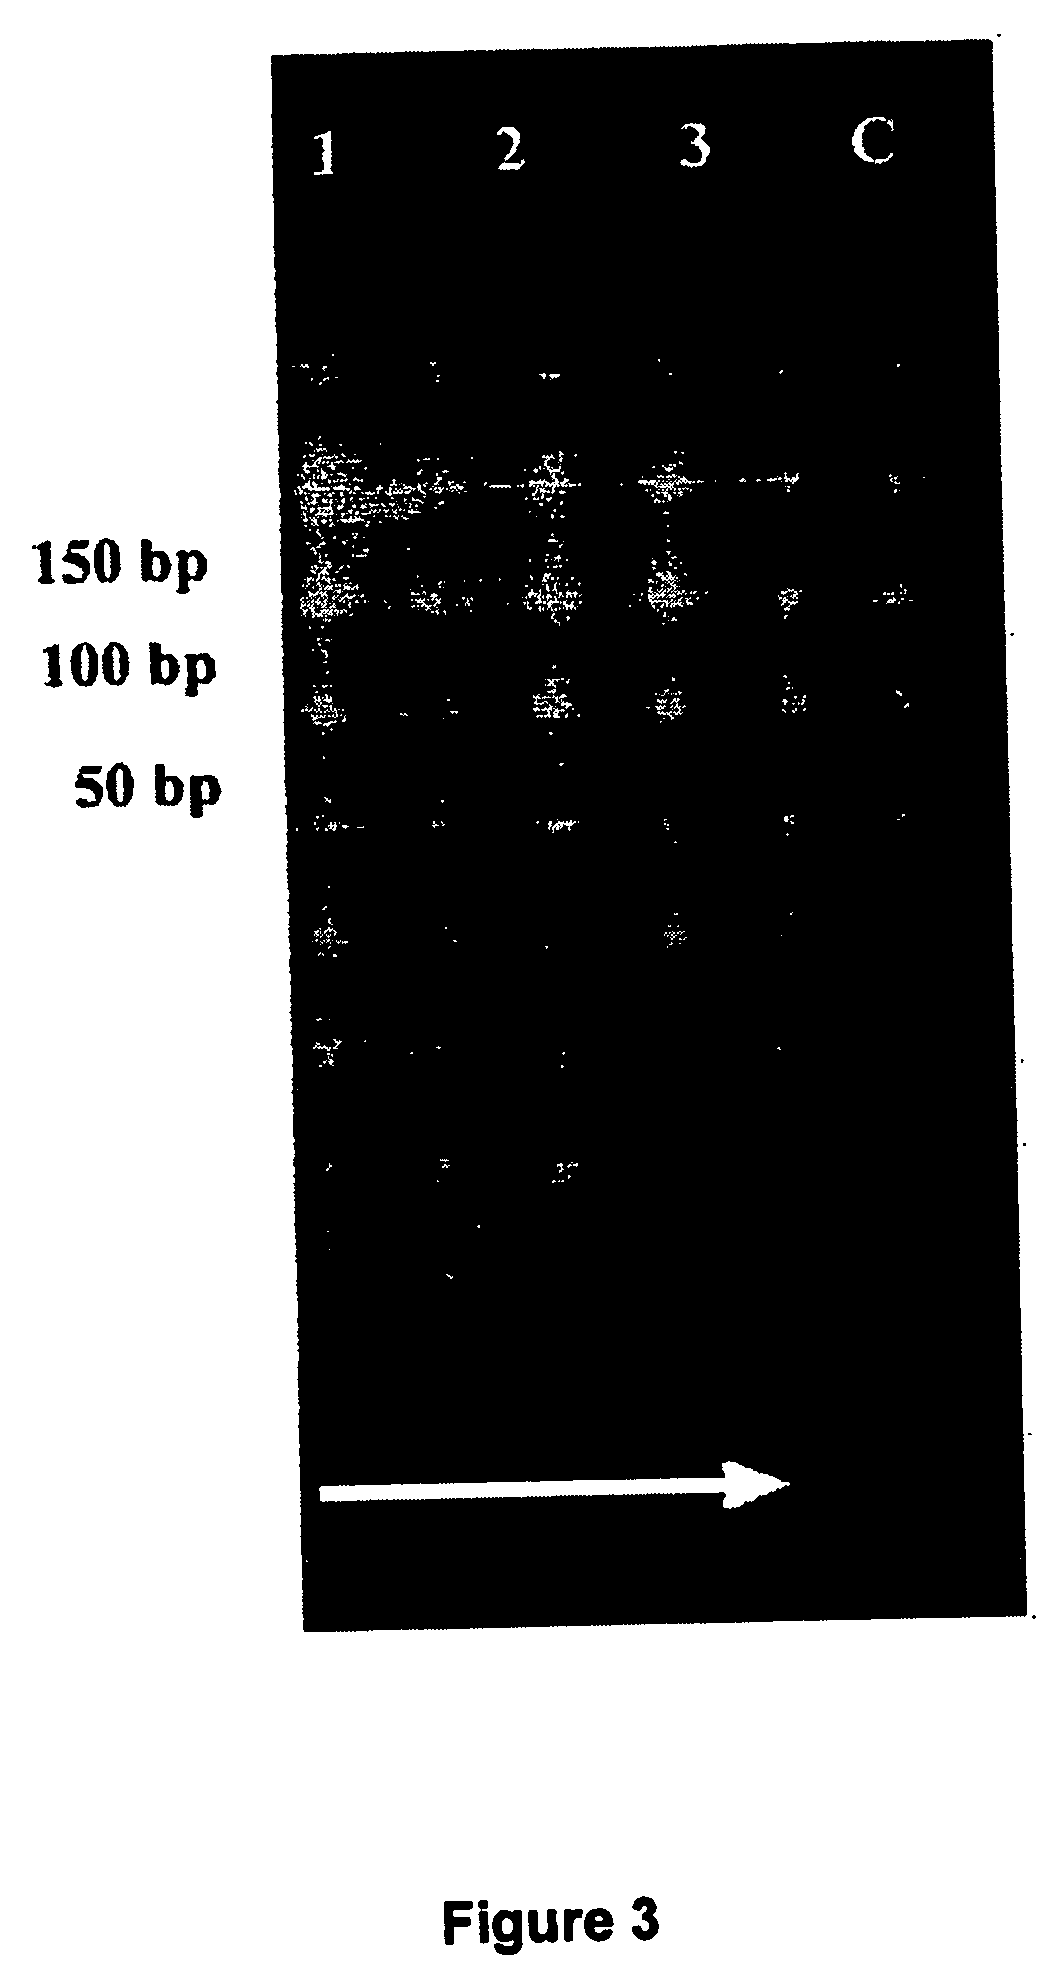 Methods for identifying and isolating unique nucleic acid sequences